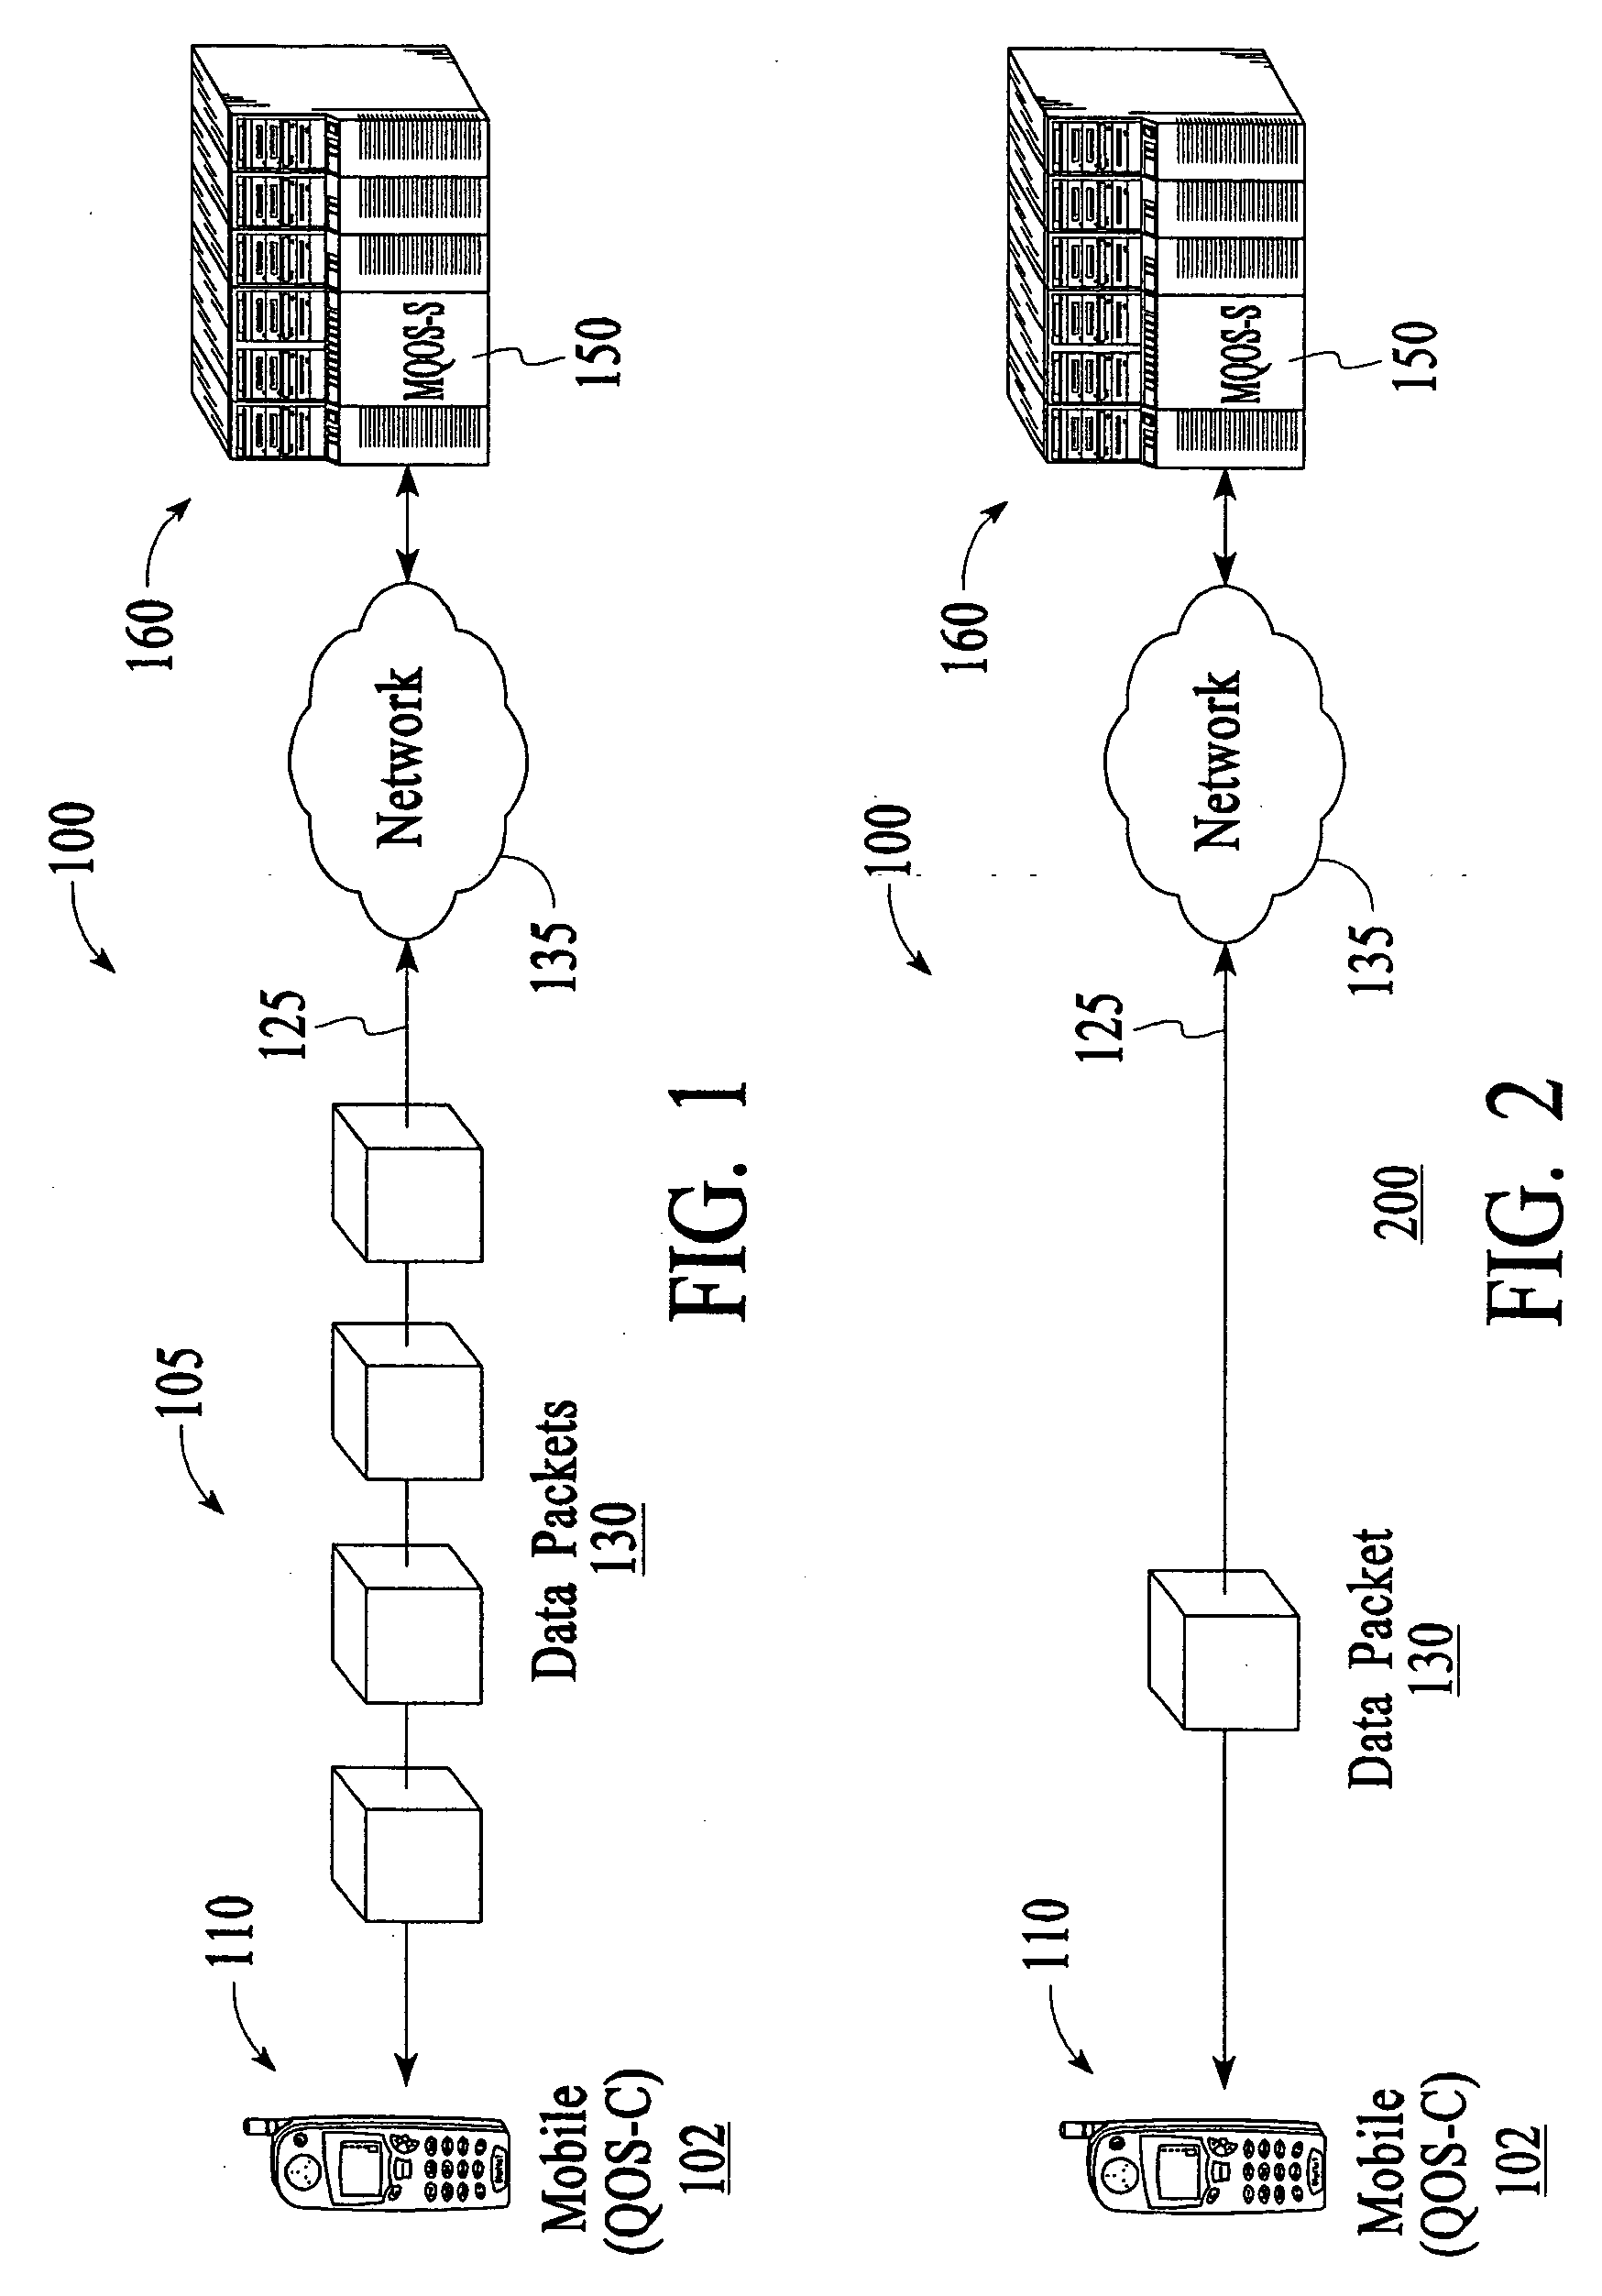 Method and system for processing quality of service (QOS) performance levels for wireless devices